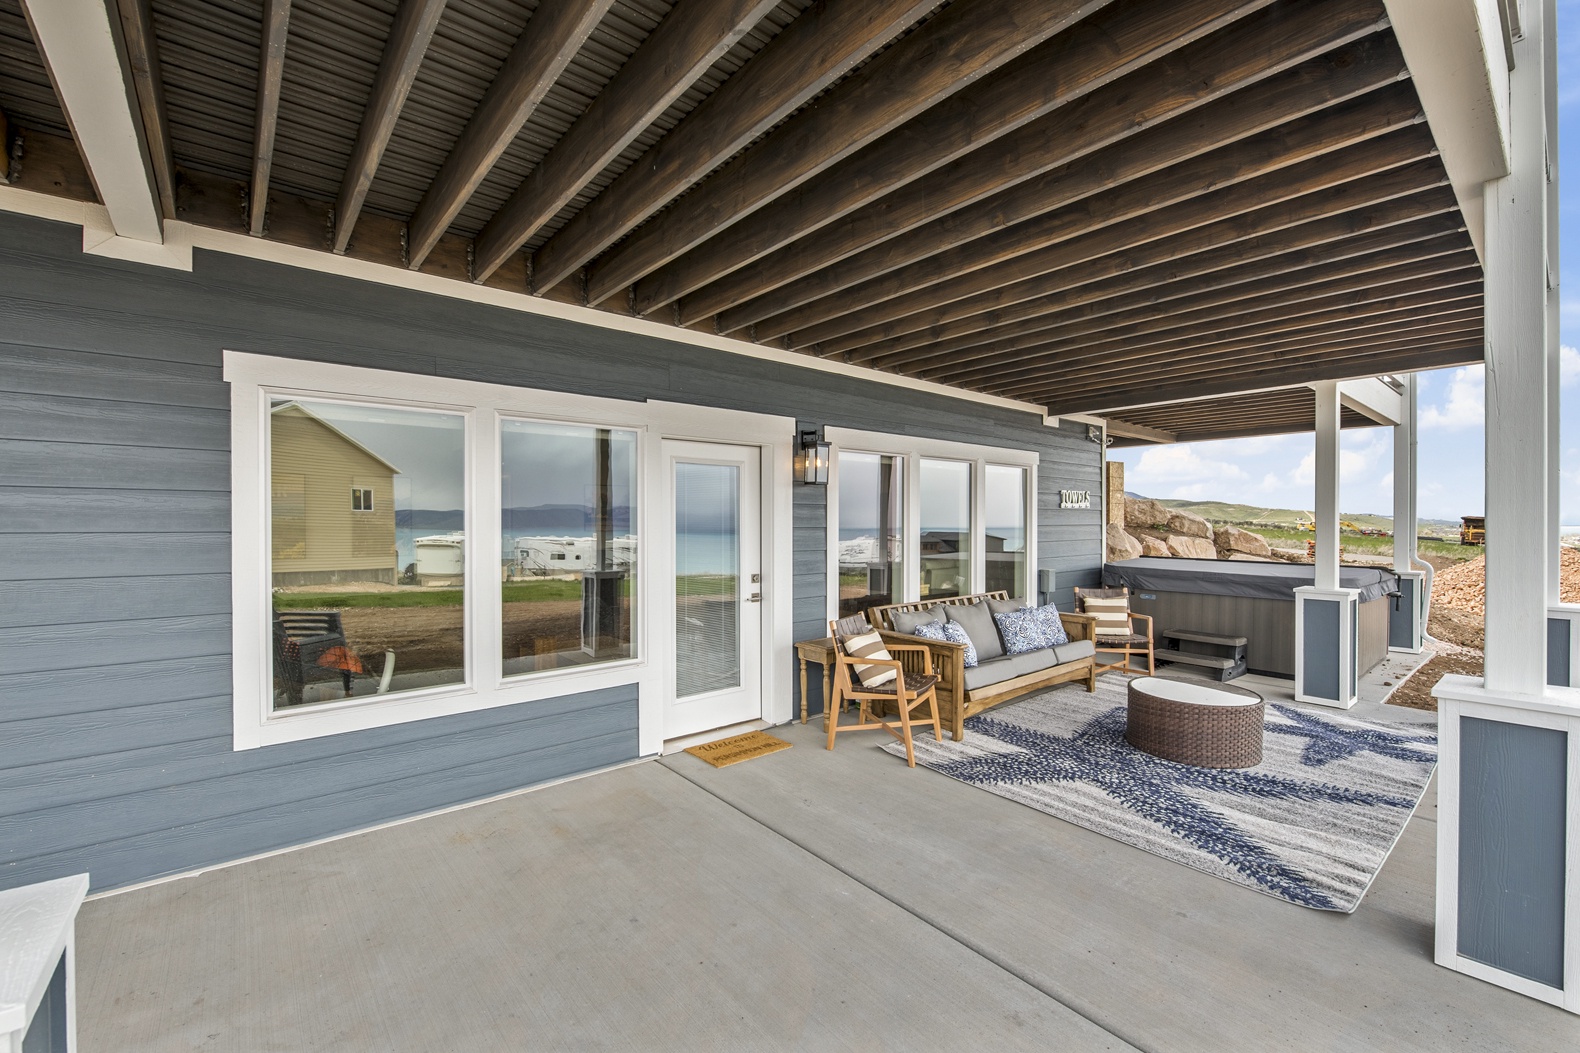 Persimmon HIll-Patio under deck with lounge furniture